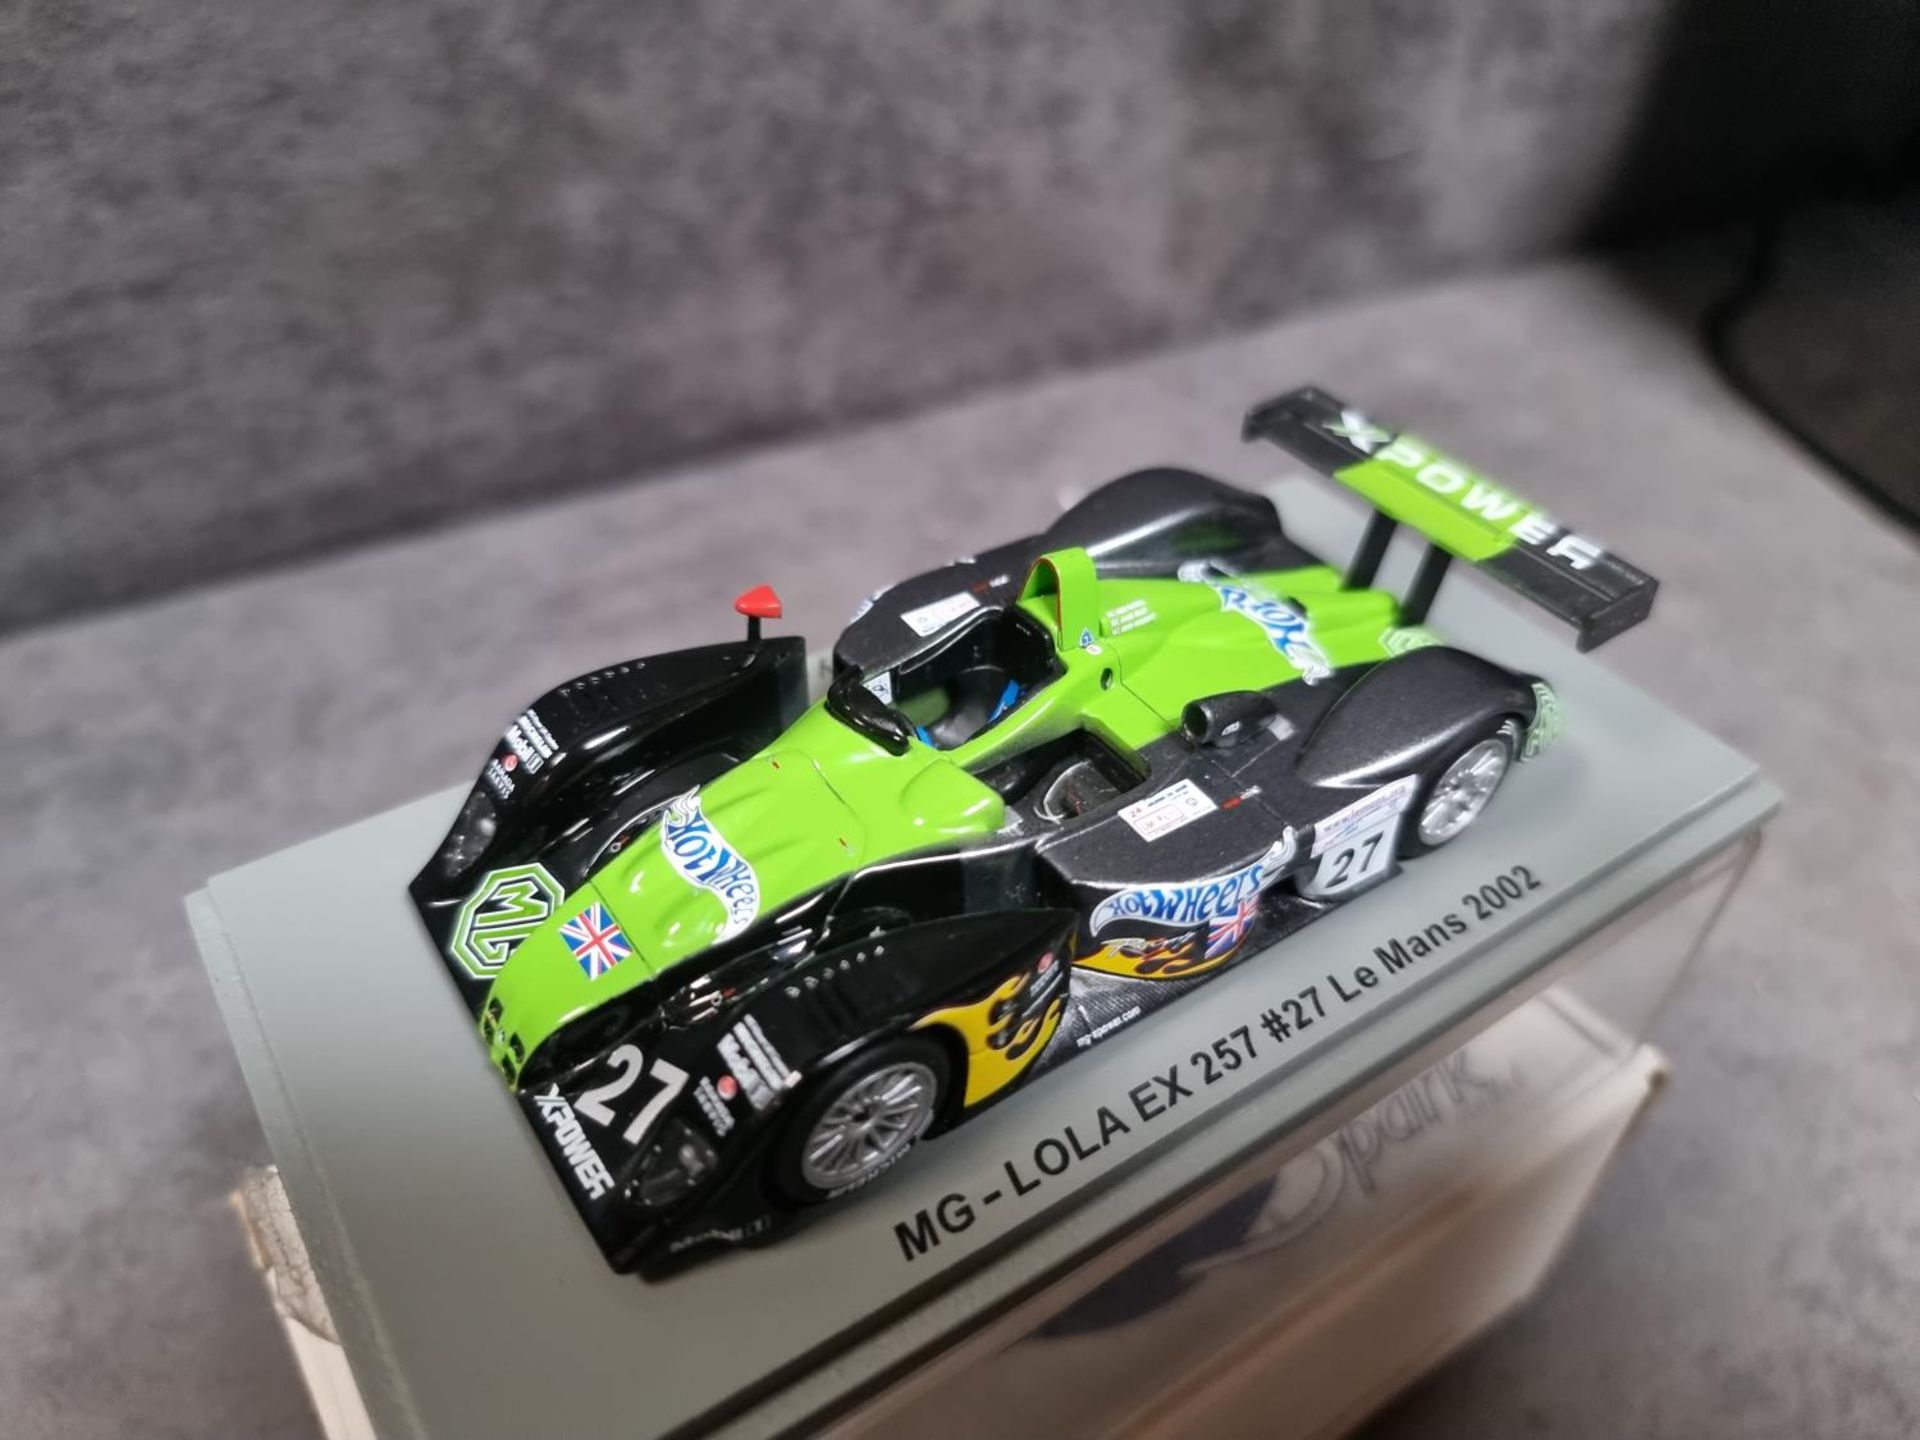 Spark 1/43 Diecast Scale Model #SCMG06 MG Lola EX257 #27 'Blundell - Bailey - Mcgarrity' Le Mans - Image 3 of 3